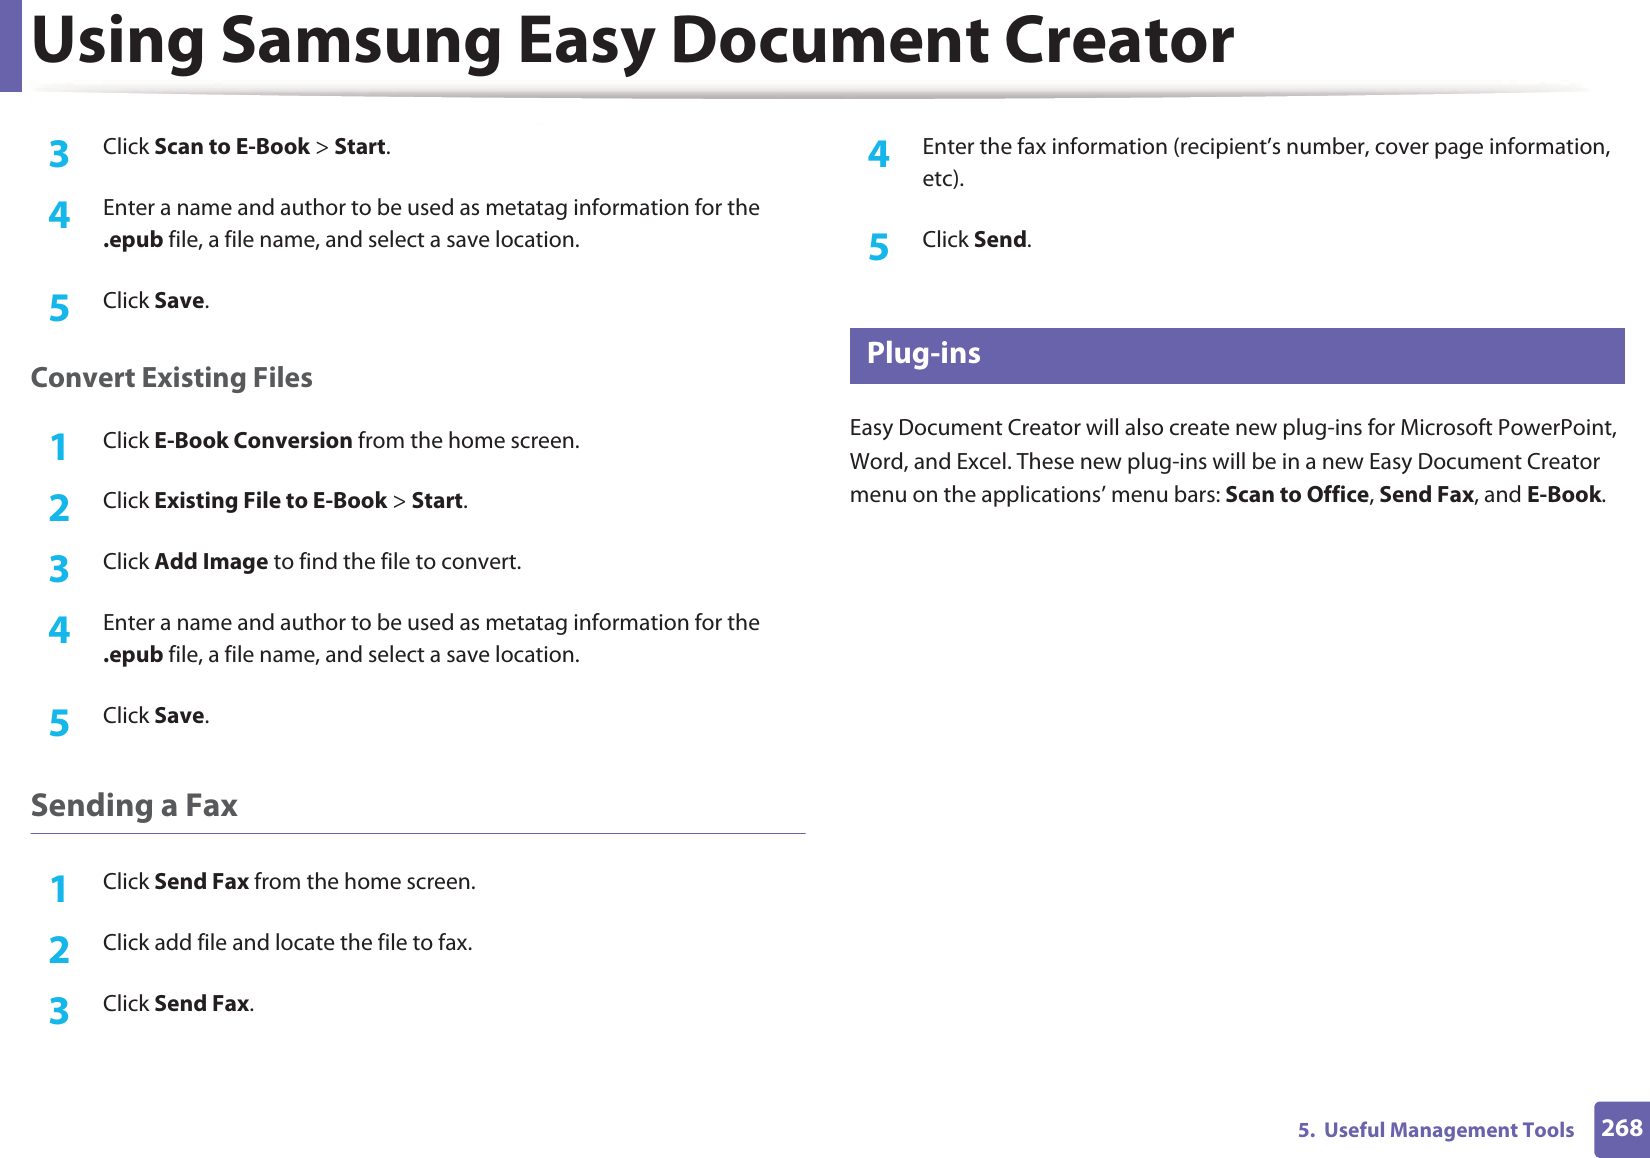 Using Samsung Easy Document Creator2685.  Useful Management Tools3  Click Scan to E-Book &gt; Start.4  Enter a name and author to be used as metatag information for the .epub file, a file name, and select a save location.5  Click Save.Convert Existing Files1Click E-Book Conversion from the home screen.2  Click Existing File to E-Book &gt; Start.3  Click Add Image to find the file to convert.4  Enter a name and author to be used as metatag information for the .epub file, a file name, and select a save location.5  Click Save.Sending a Fax1Click Send Fax from the home screen.2  Click add file and locate the file to fax.3  Click Send Fax.4  Enter the fax information (recipient’s number, cover page information, etc).5  Click Send.8 Plug-insEasy Document Creator will also create new plug-ins for Microsoft PowerPoint, Word, and Excel. These new plug-ins will be in a new Easy Document Creator menu on the applications’ menu bars: Scan to Office, Send Fax, and E-Book.